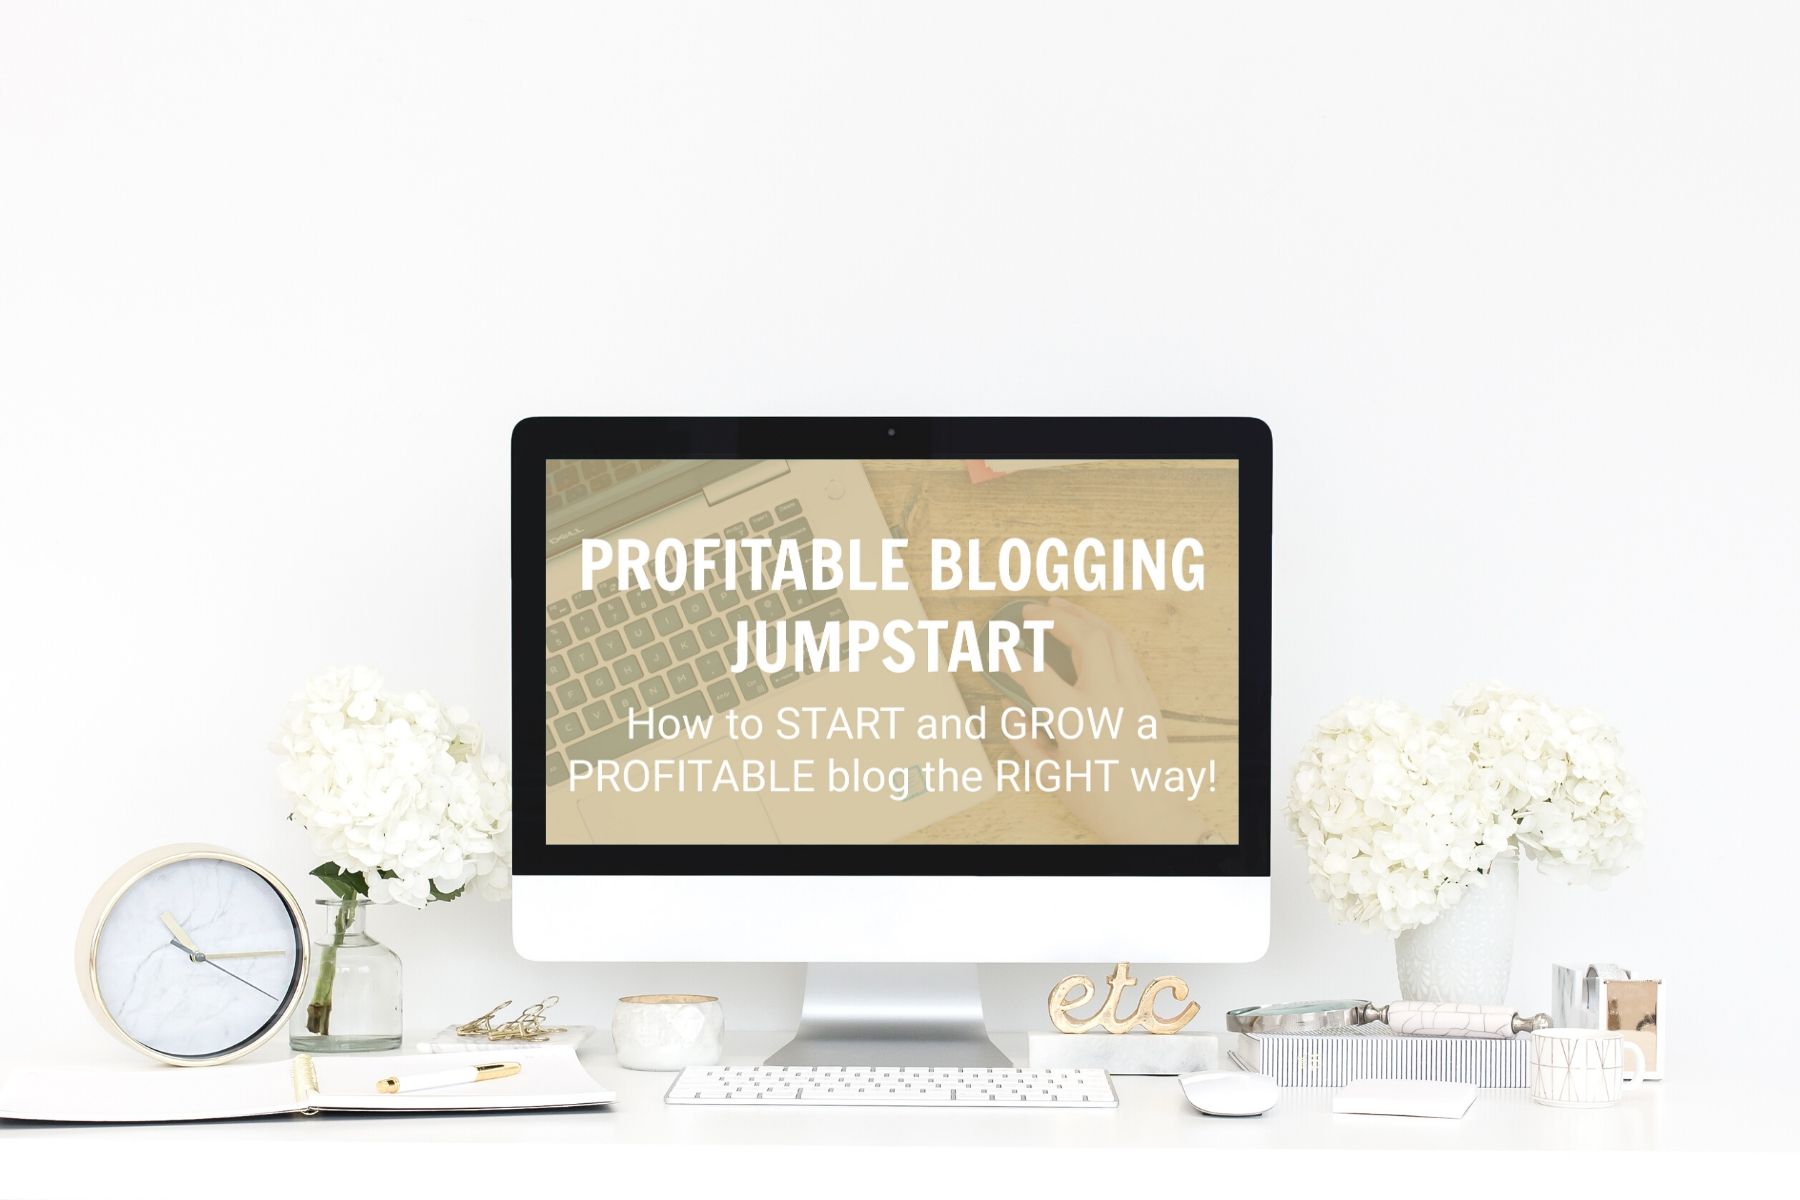 Profitable Blogging Jumpstart Course – How to START and GROW a PROFITABLE blog the RIGHT way